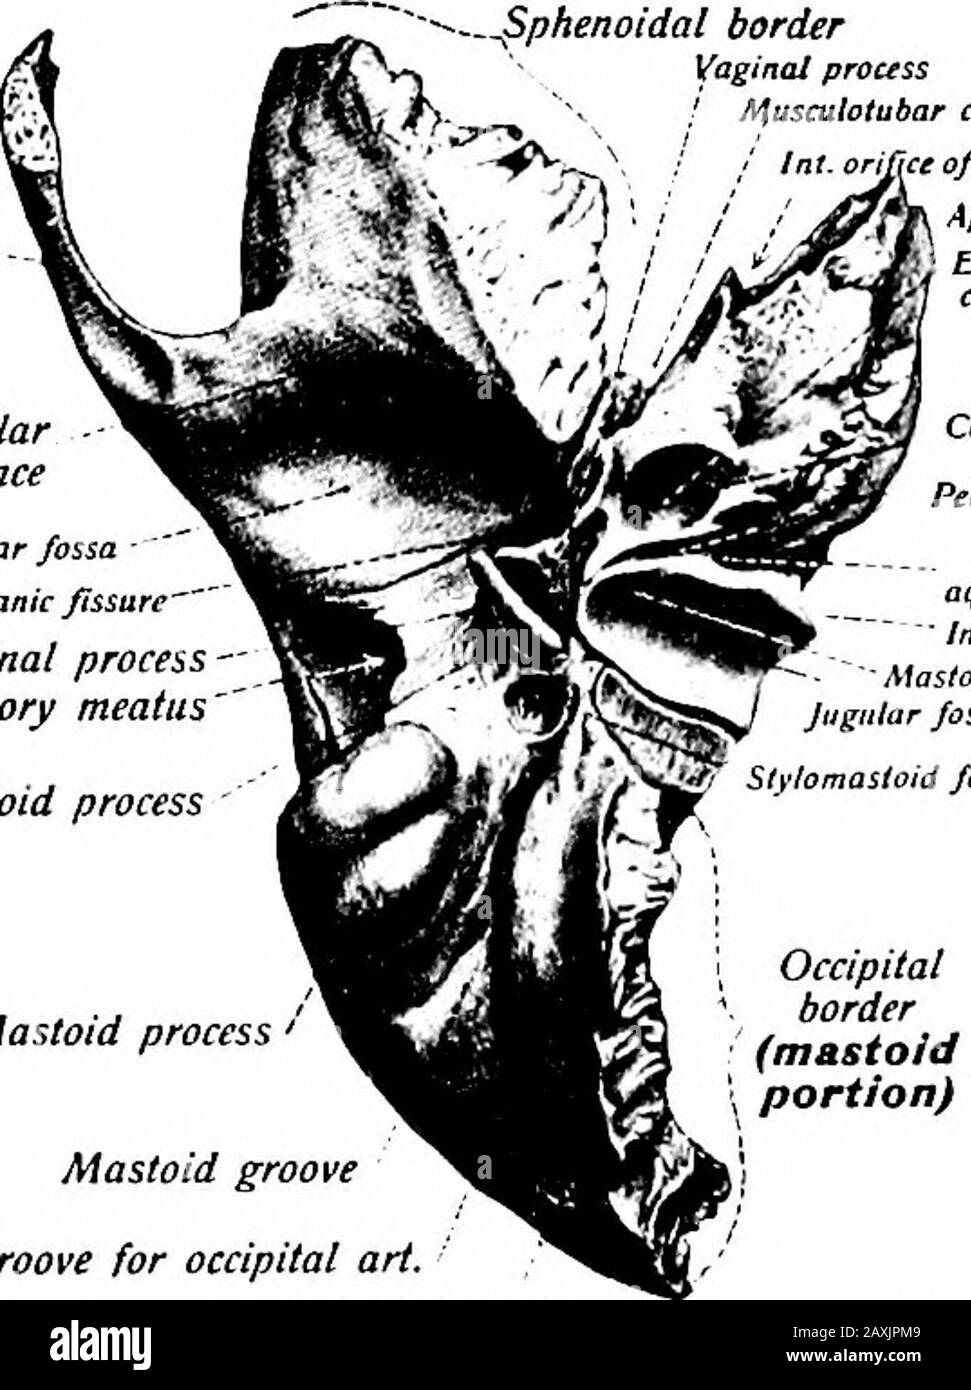 A manual of anatomy . E TEMPORAL BONES 55 stylohyoid and stylomaxillary ligaments. Behind the process is theforamen styloideum, for the facial nerve and the mastoid artery. Thejugular fossa {fossa jiigtdaris) is medial to the process and assists informing the jugular foramen. In the jugular fossa is the canalismastoideiis for the auricular branch of the vagus. In front of andlateral to the fossa is the carotid canal {canalis caroticus) for the trans-mission of the internal carotid artery and the sympathetic plexus.Upon the ridge separating the fossa and canal is the canalictdtistympanictis for Stock Photo